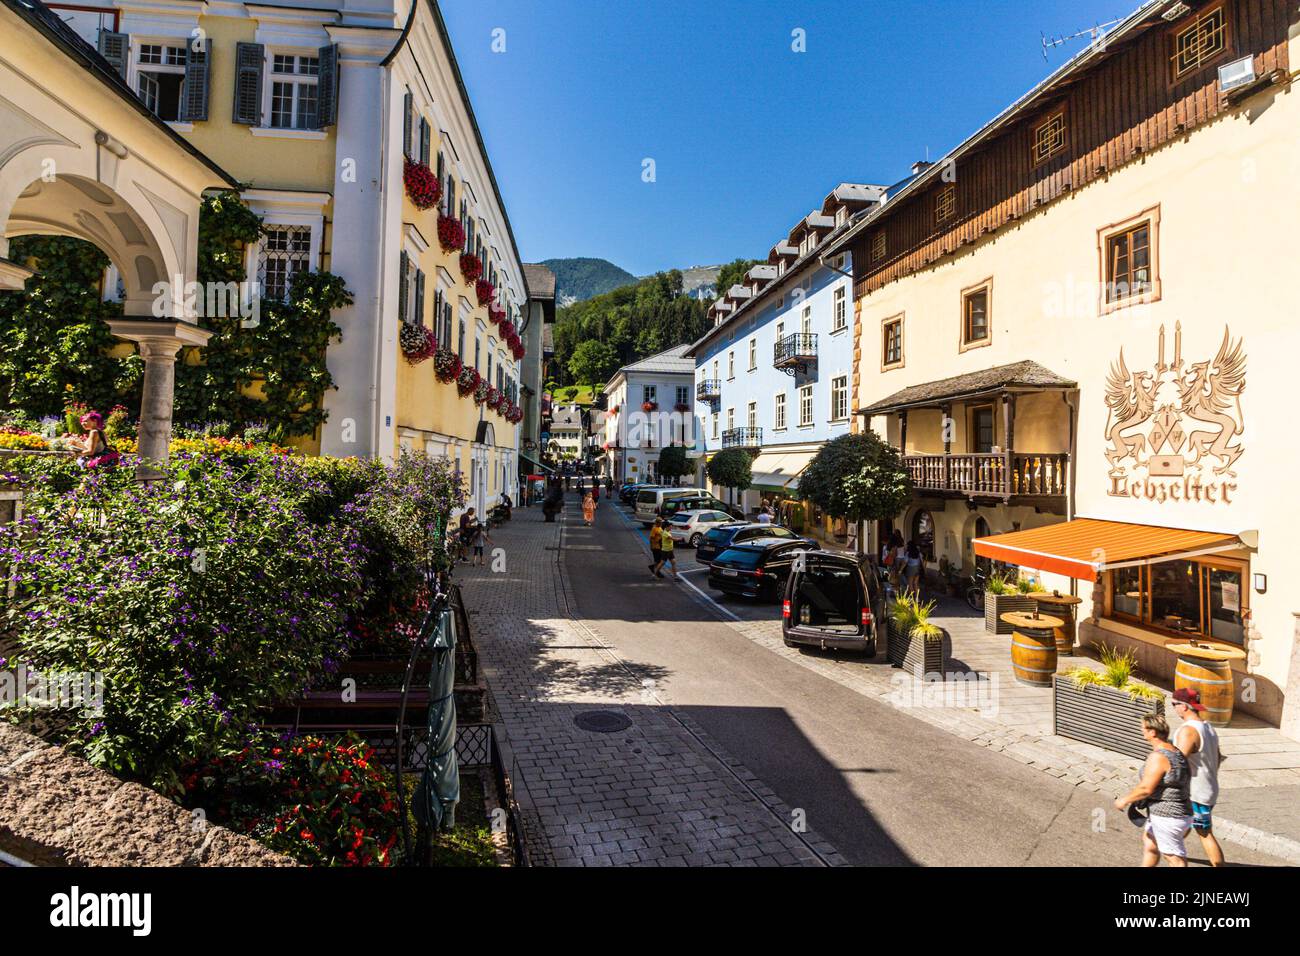 St. Wolfgang in Salzkammergut is a market town consisting of very picturesque buildings and homes in Austria, Europe Stock Photo